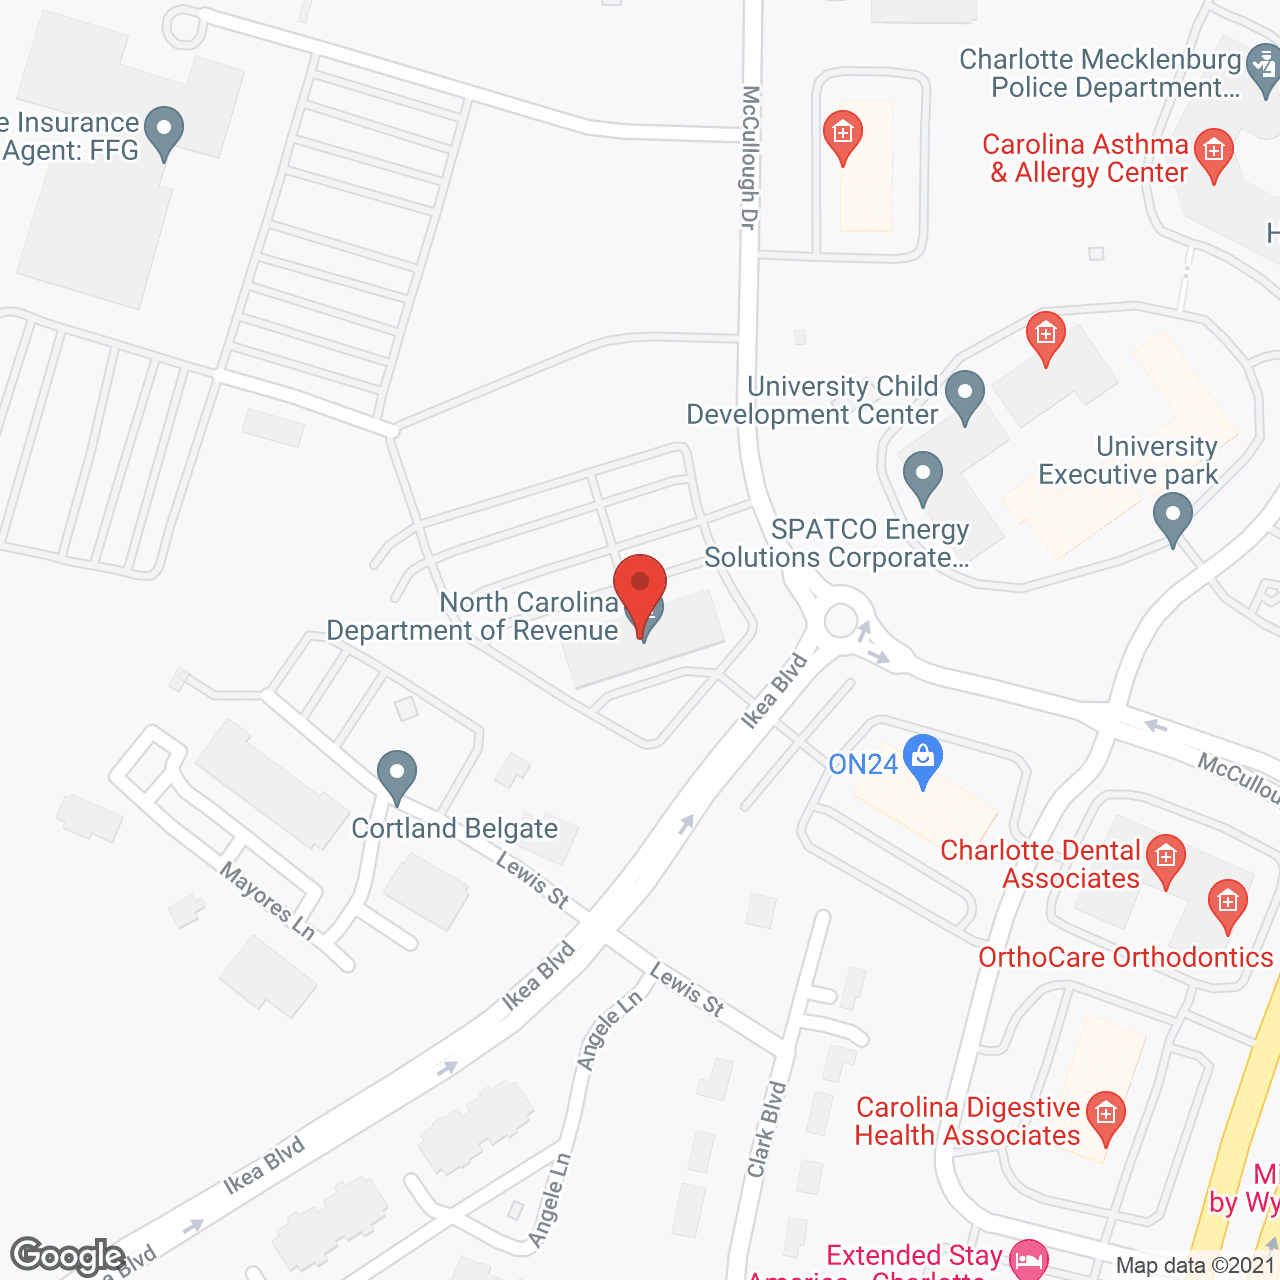 University Care Services in google map